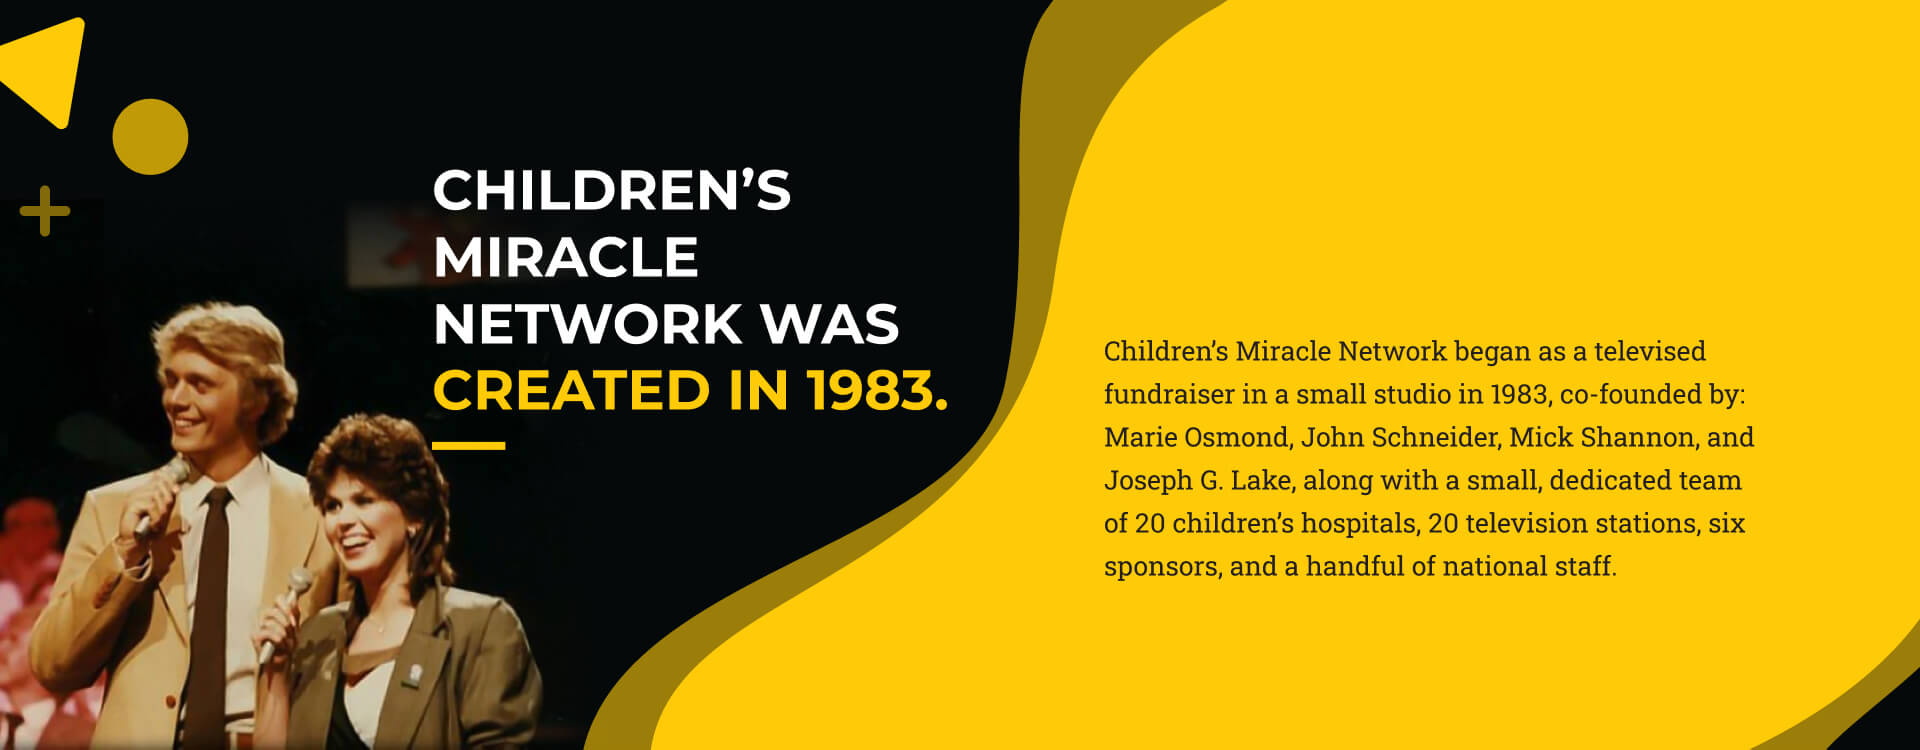 Slide 1 - Children’s Miracle Network was created in 1983. Children’s Miracle Network began as a televised fundraiser in a small studio in 1983, co-founded by Marie Osmond, John Schneider, Mick Shannon and Joseph G. Lake, along with a small, dedicated team of 20 children’s hospitals, 20 television stations, six sponsors and a handful of national staff.